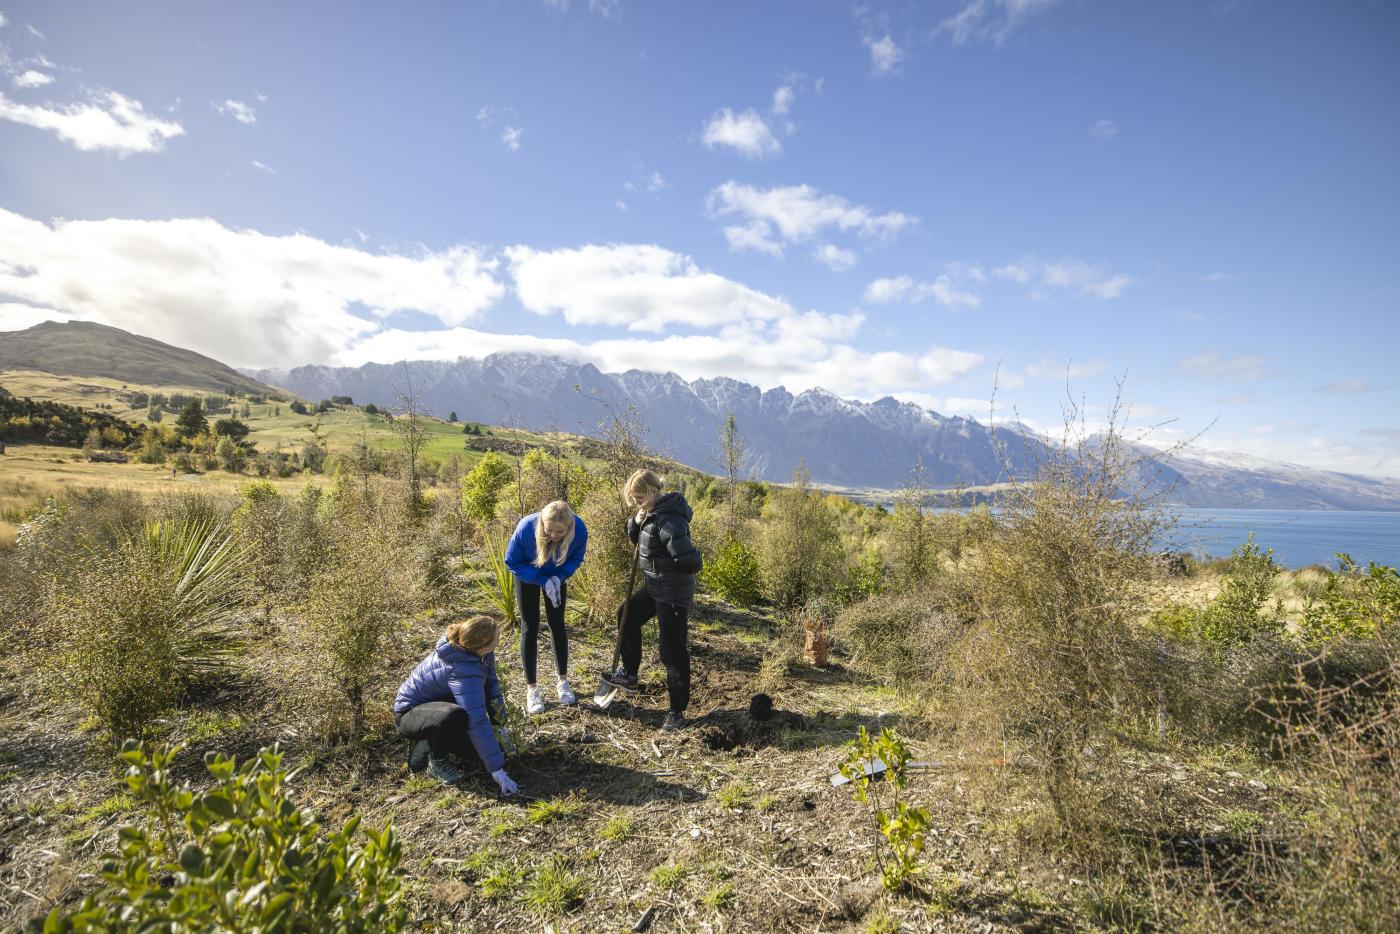 Group planting trees with the Remarkables mountain in the background